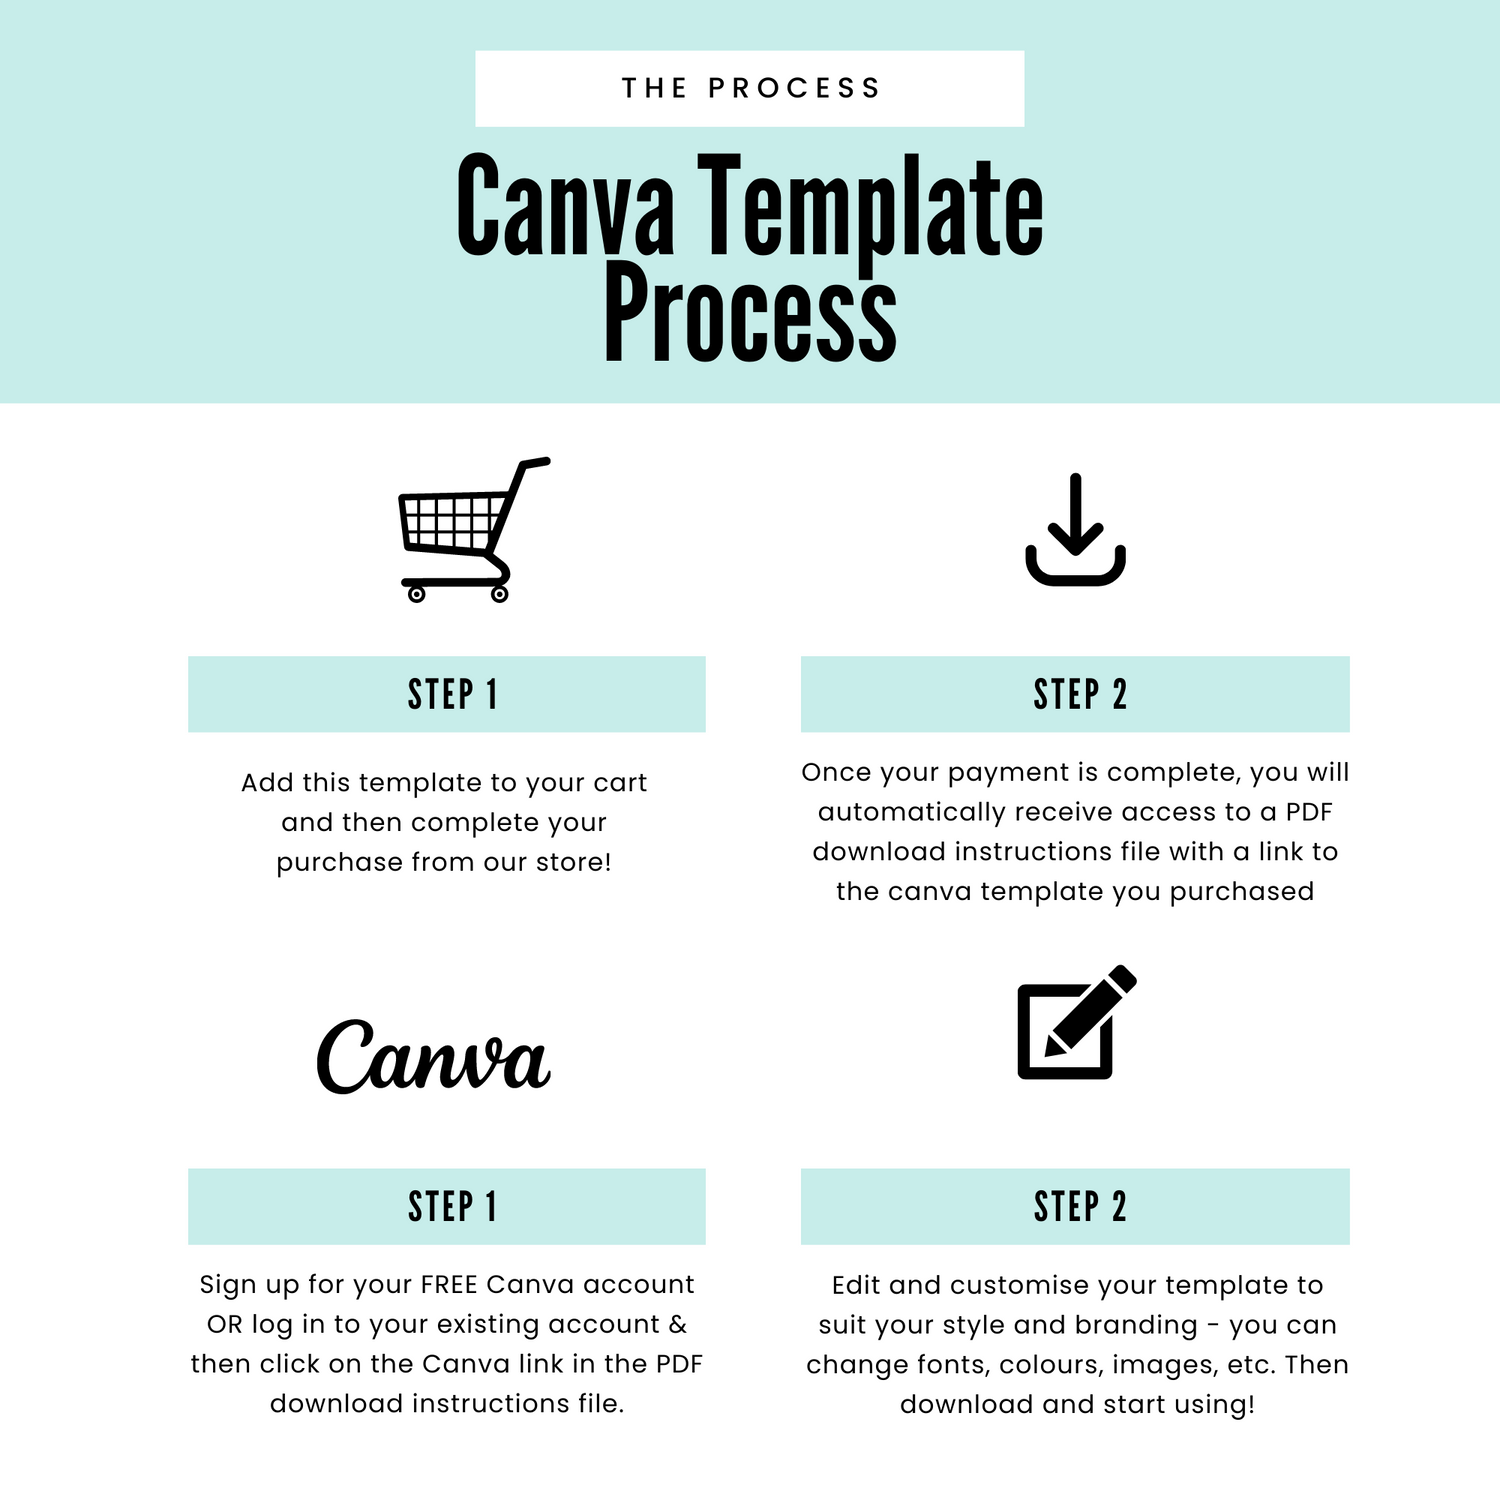 How to edit teamplate in canva